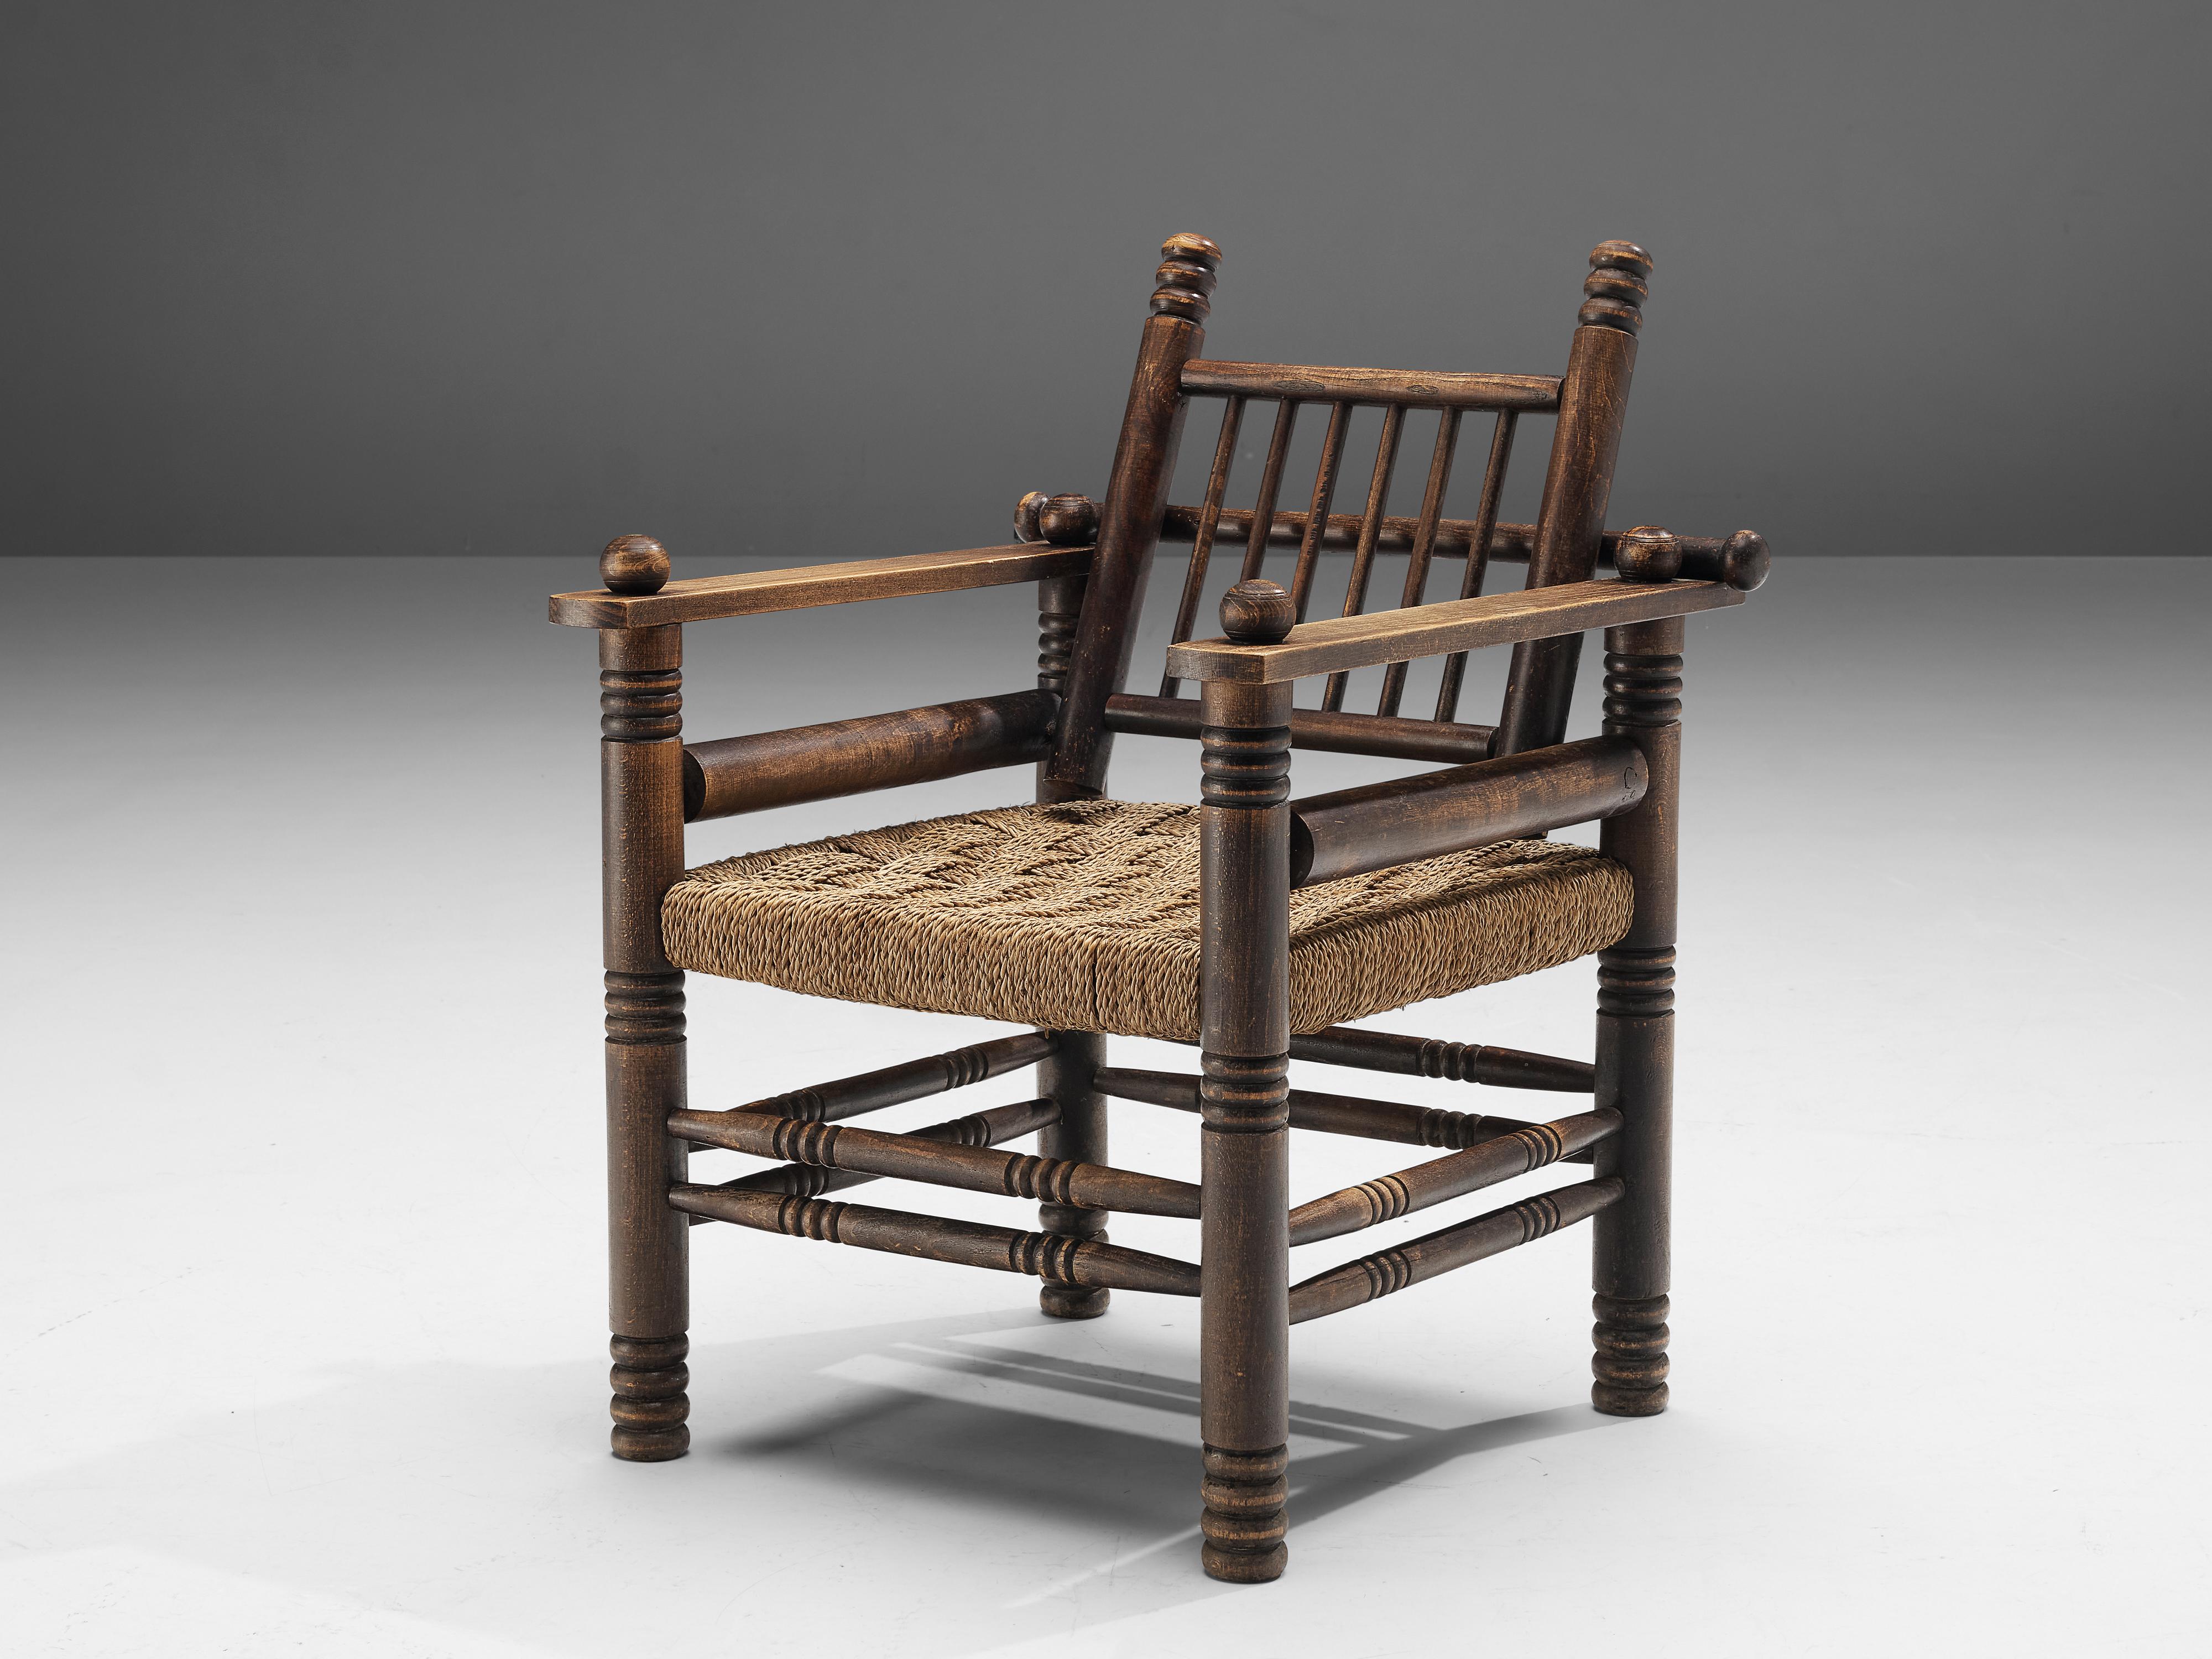 Charles Dudouyt, lounge chair, oak, paper cord, France, 1940s

Decorative lounge chair by Charles Dudouyt. The frame has multiple carved details that add up to a complex whole. Carved lines and circular ends, straight and round parts come together